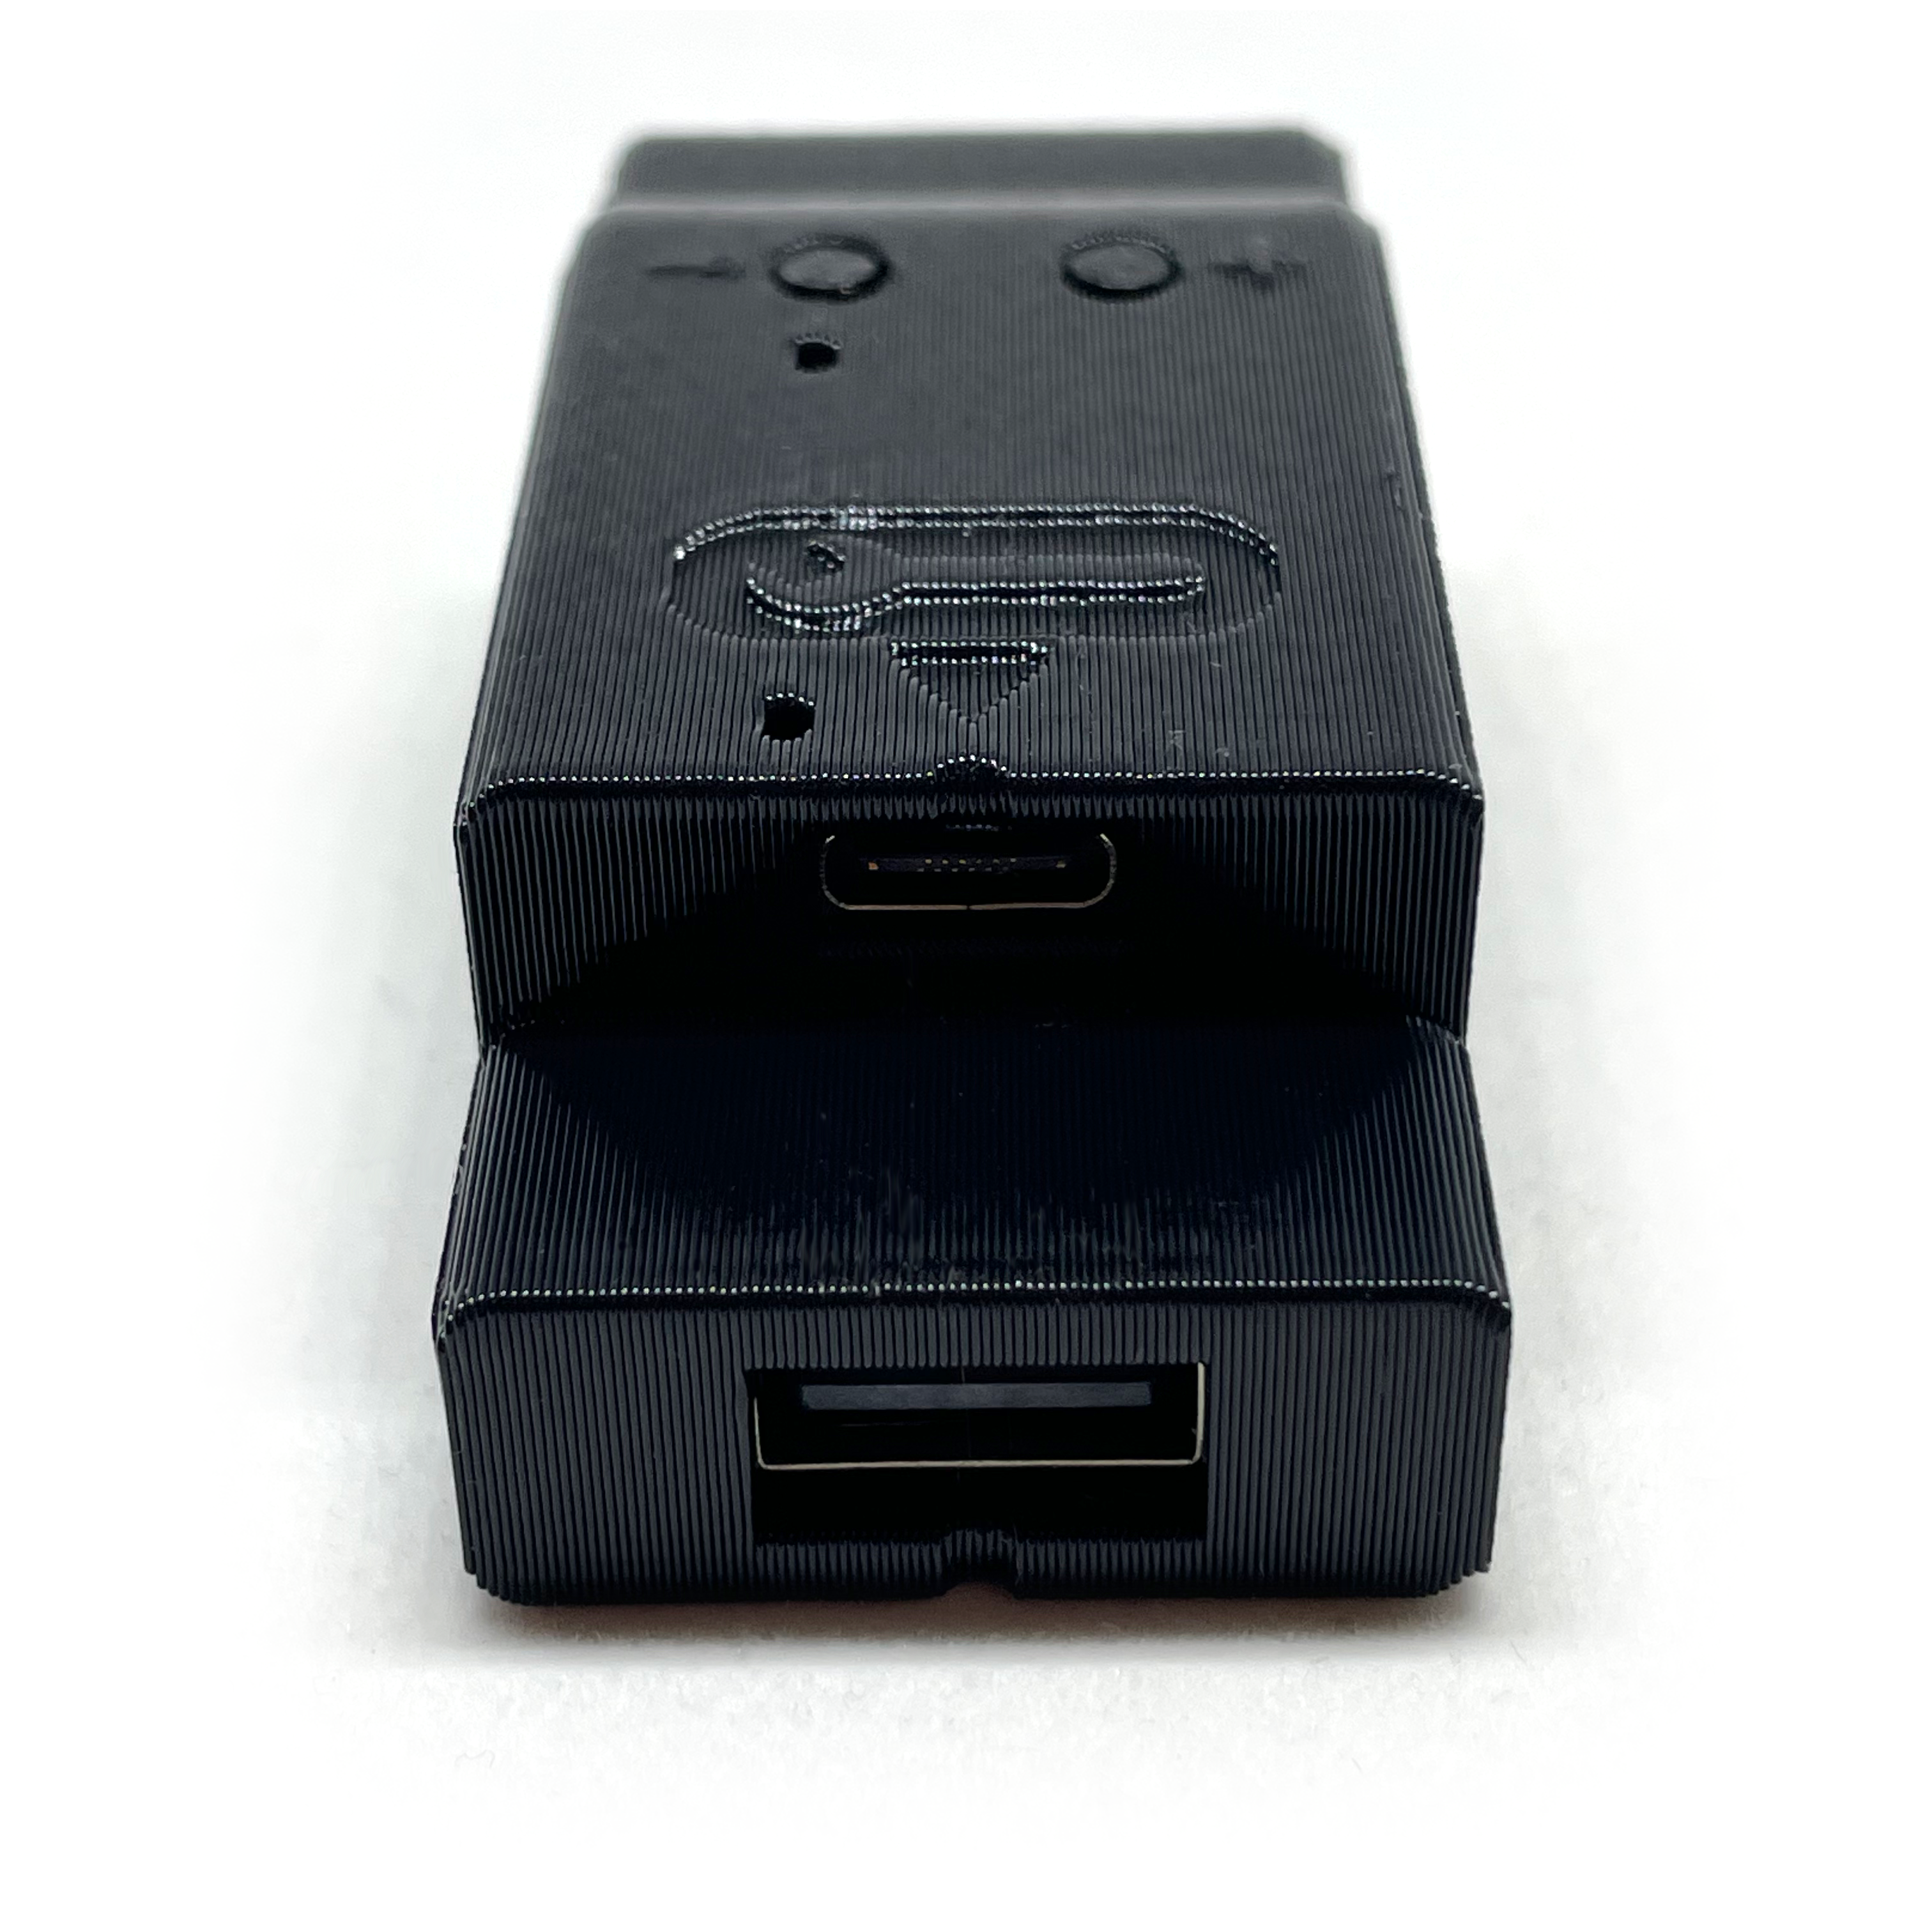 USB to PC Engine Controller Adapter (USB2PCE)